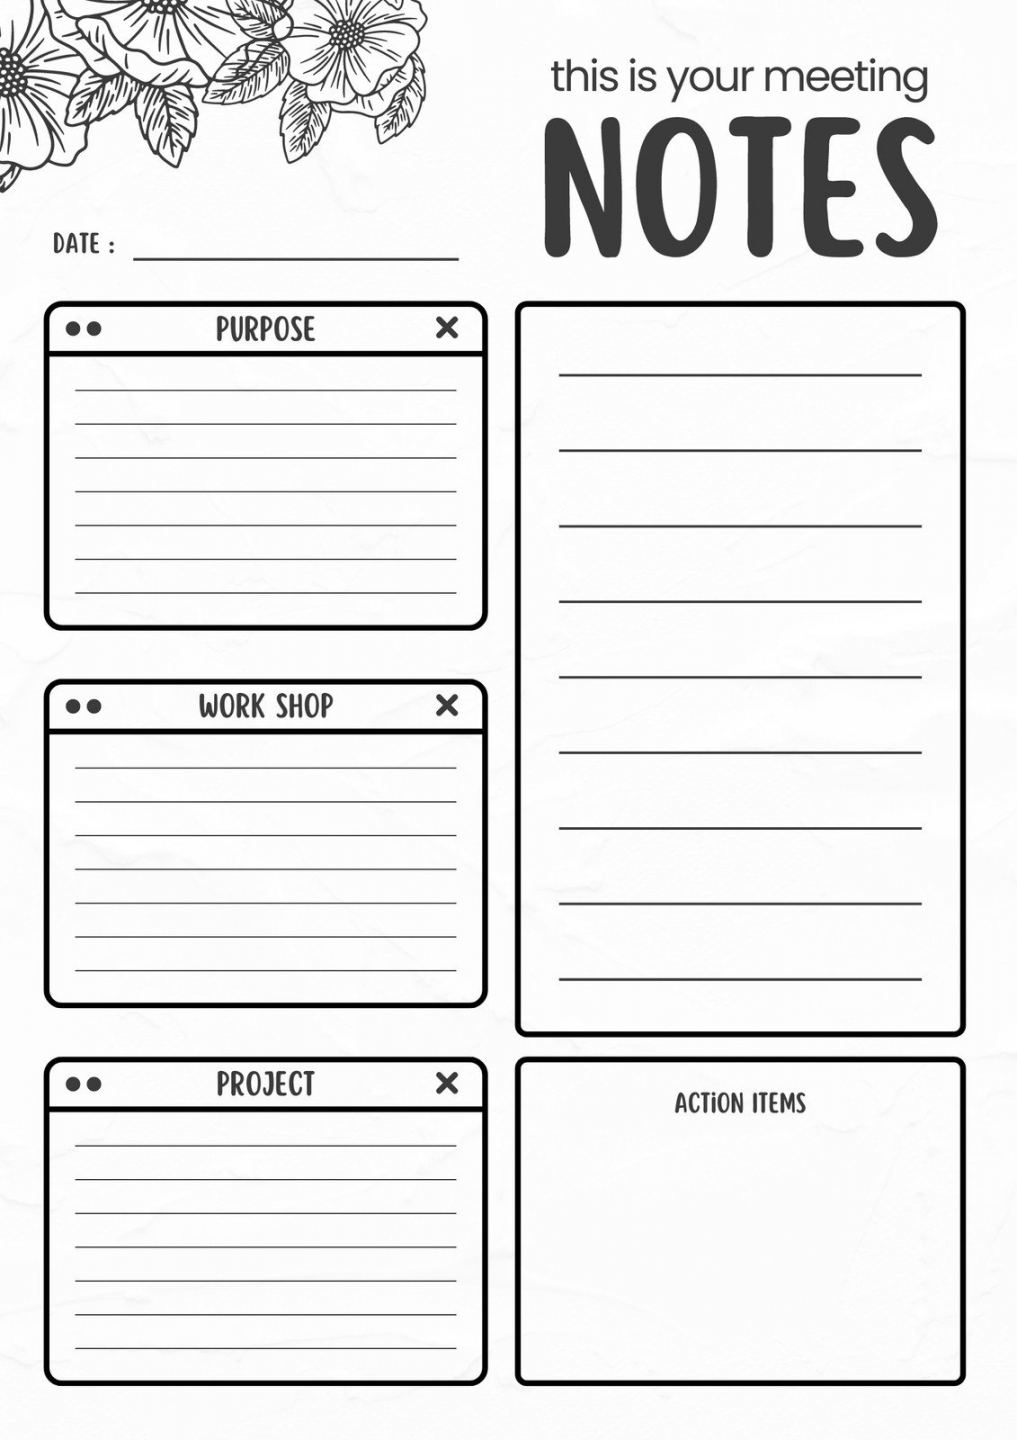 Free and customizable notes templates - FREE Printables - Free Printable Note Taking Templates